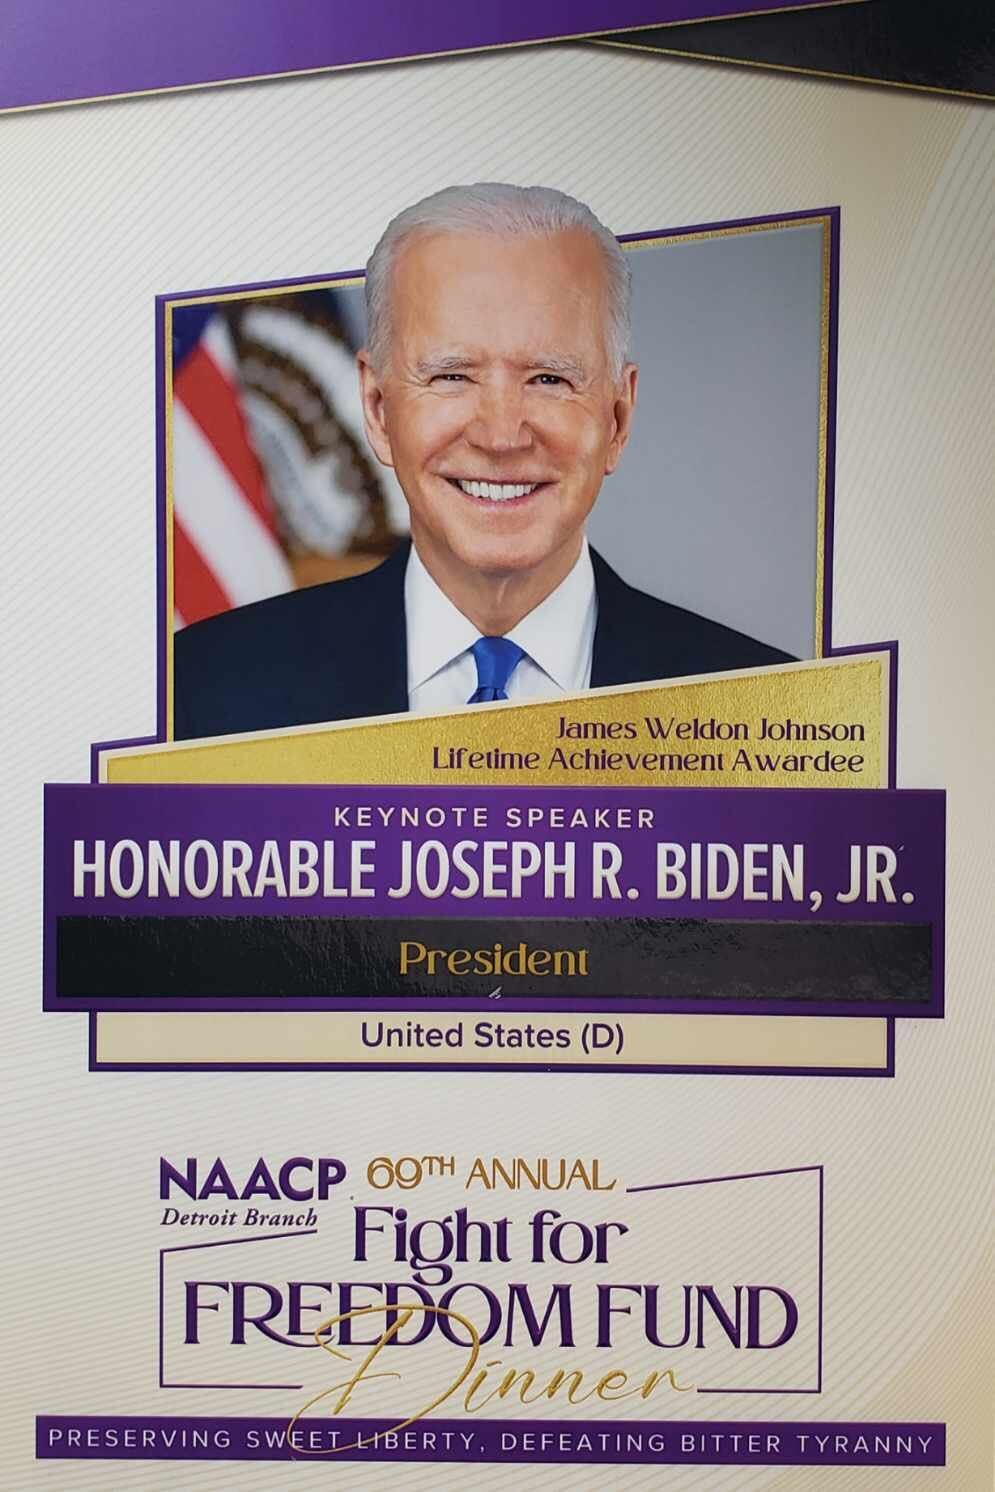 Biden to be keynote speaker at NAACP Detroit Branch's Fight For Freedom Fund Dinner